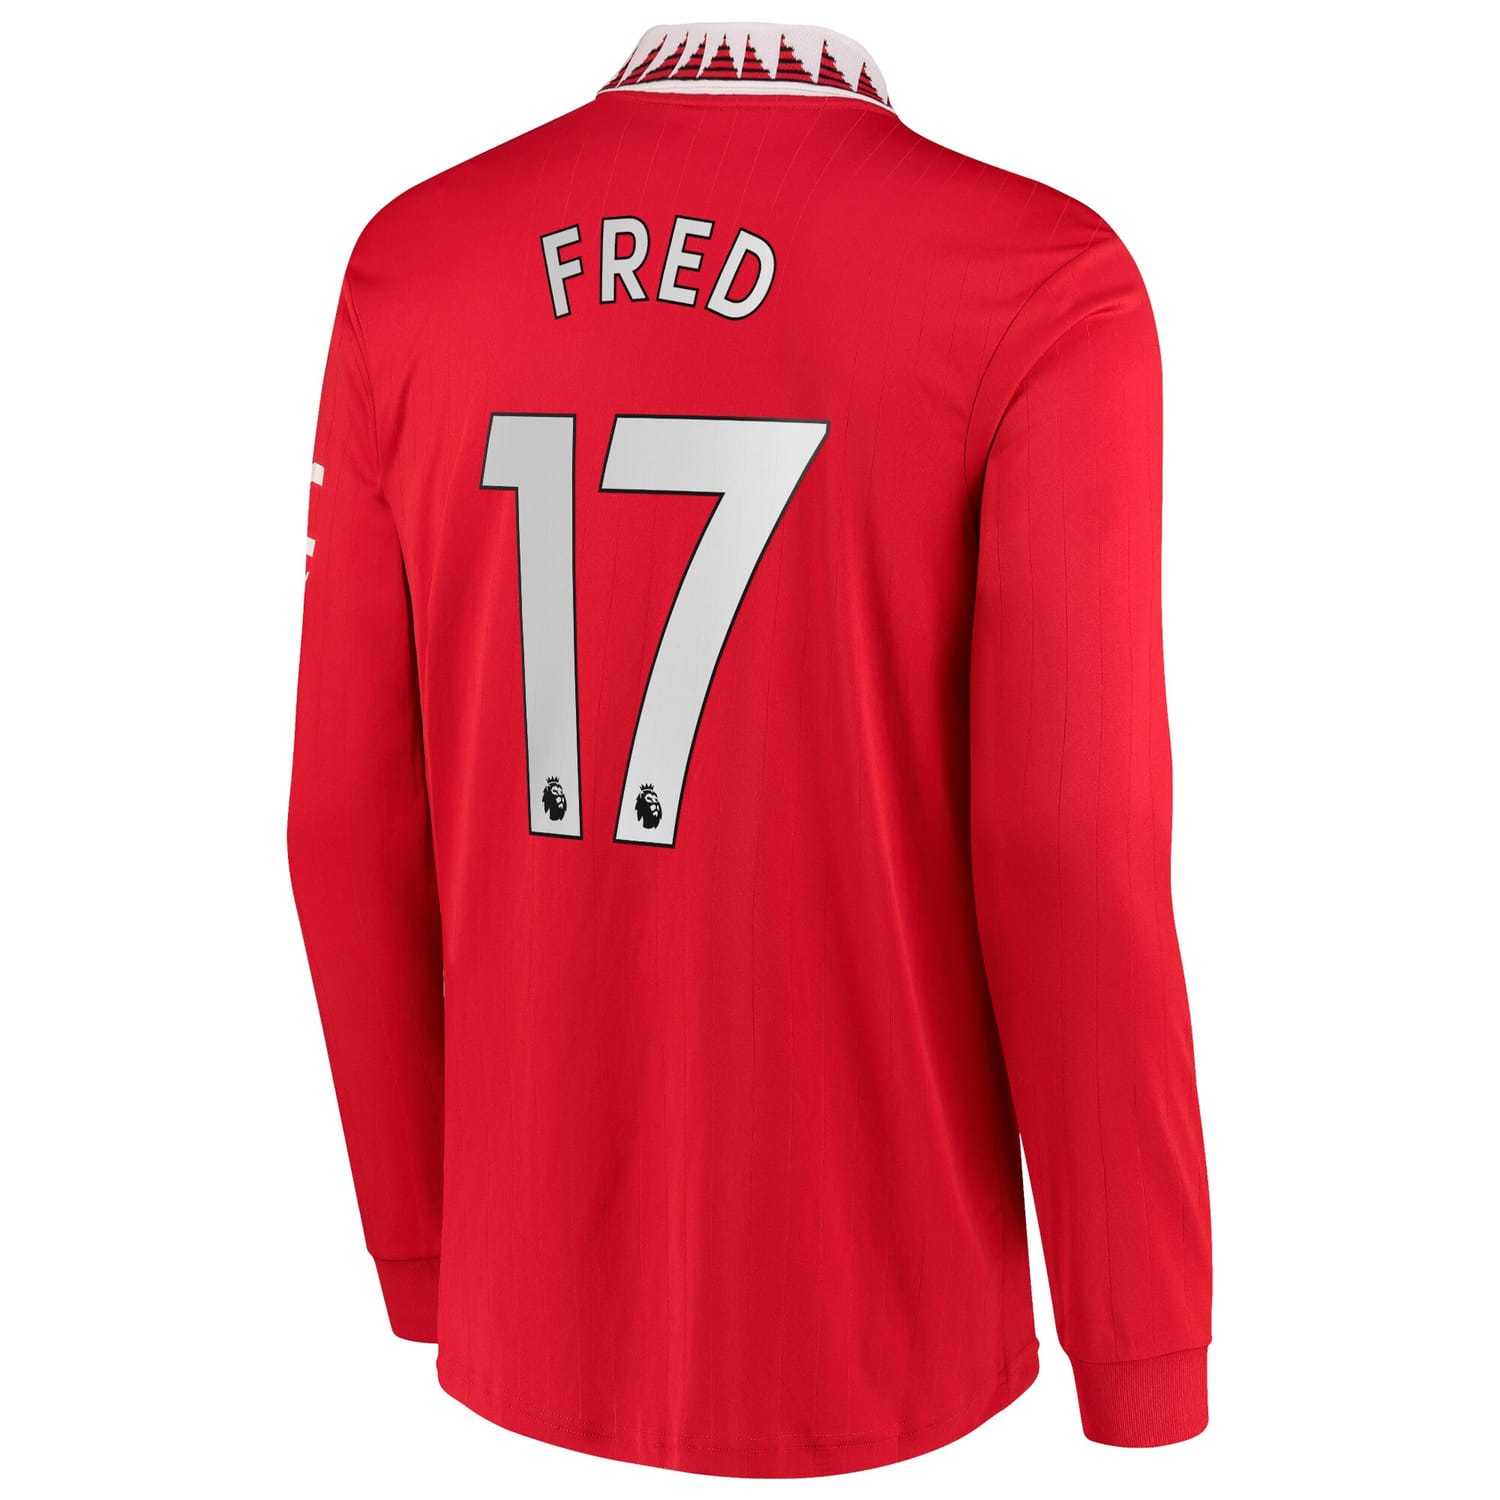 Premier League Manchester United Home Jersey Shirt Long Sleeve 2022-23 player Fred 17 printing for Men